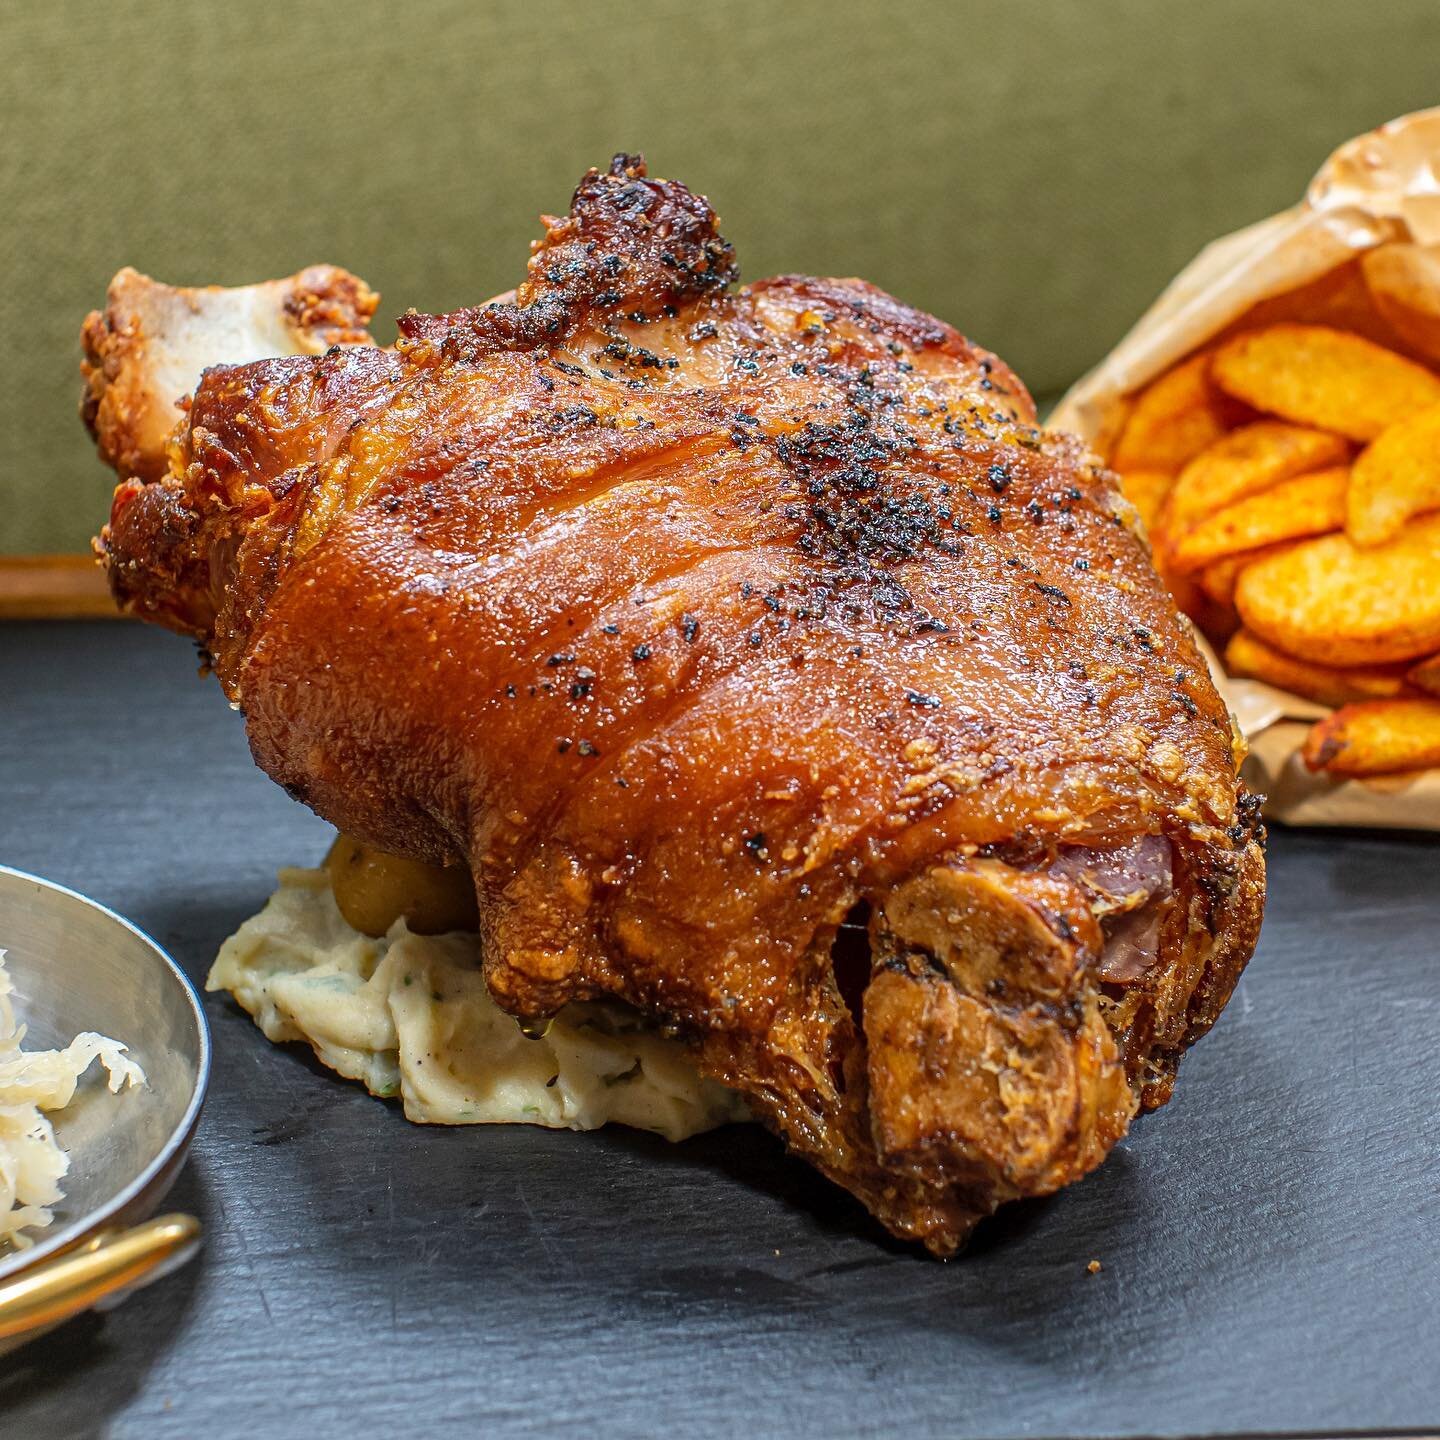 Love to share? The Hampshire Roasted Pork Knuckle is another standout item on our menu. Recommended to share for groups of three or more guaranteeing a fantastic meal at any time of the day. 🍖 

#hkrestaurants #hkeats #hkfoodie #taihang #porkknuckle